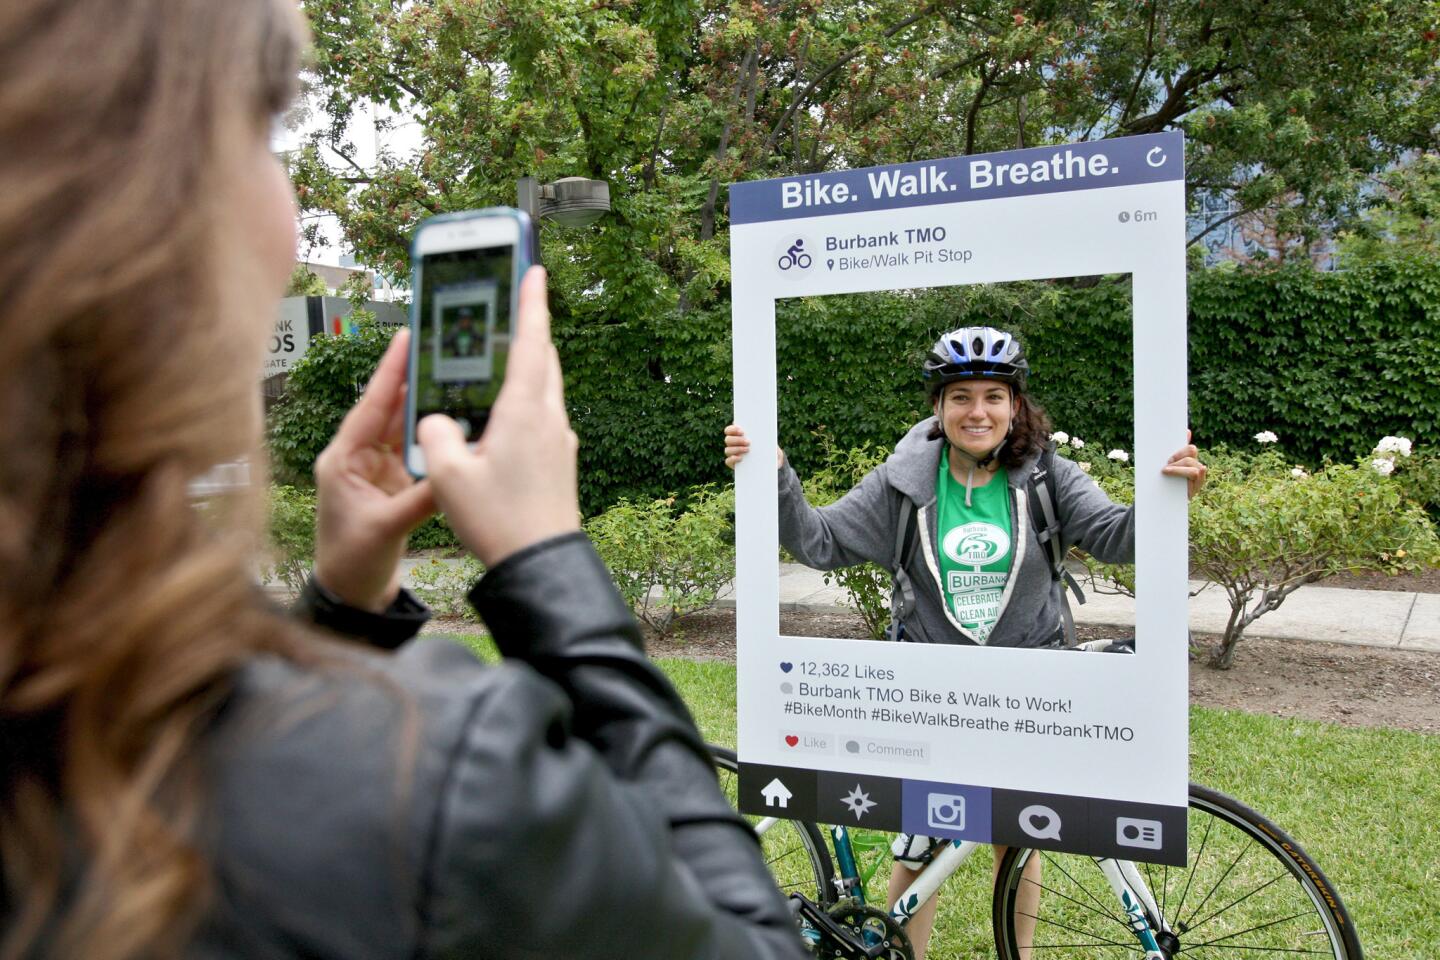 Walt Disney Studios employee and volunteer Cassi Basile, left, takes a photo of Warner Bros. employee Lindsey Cohen as she arrives at the Burbank Studios for the annual Bike and Walk to Work day, on Thursday, May 19, 2016. The event was sponsored by the Burbank Transportation Management Organization.